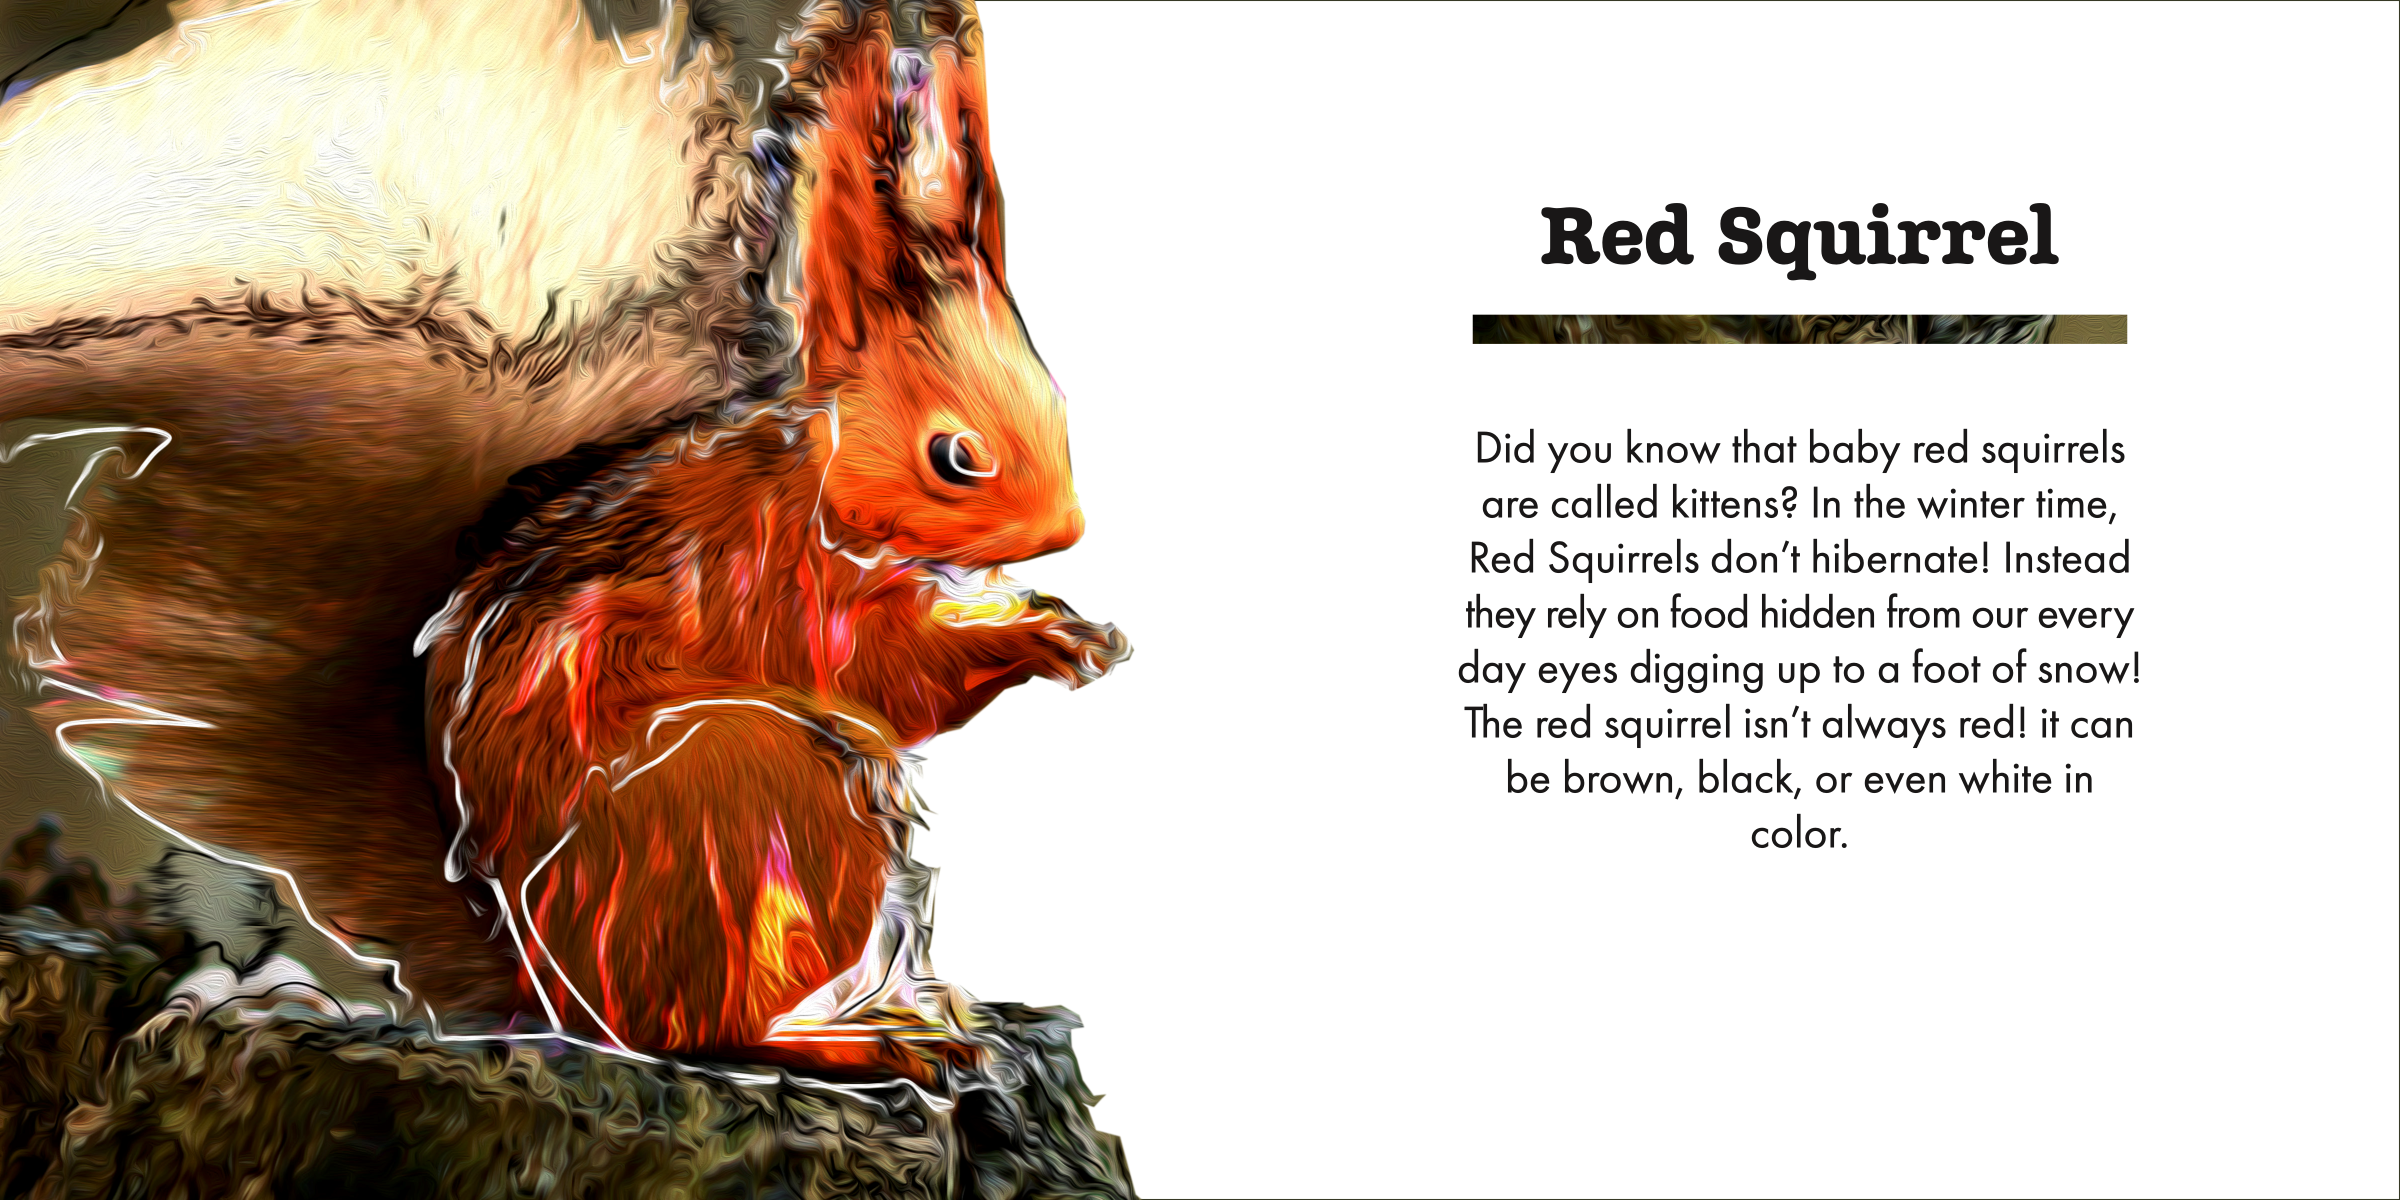 Red squirrel with some facts